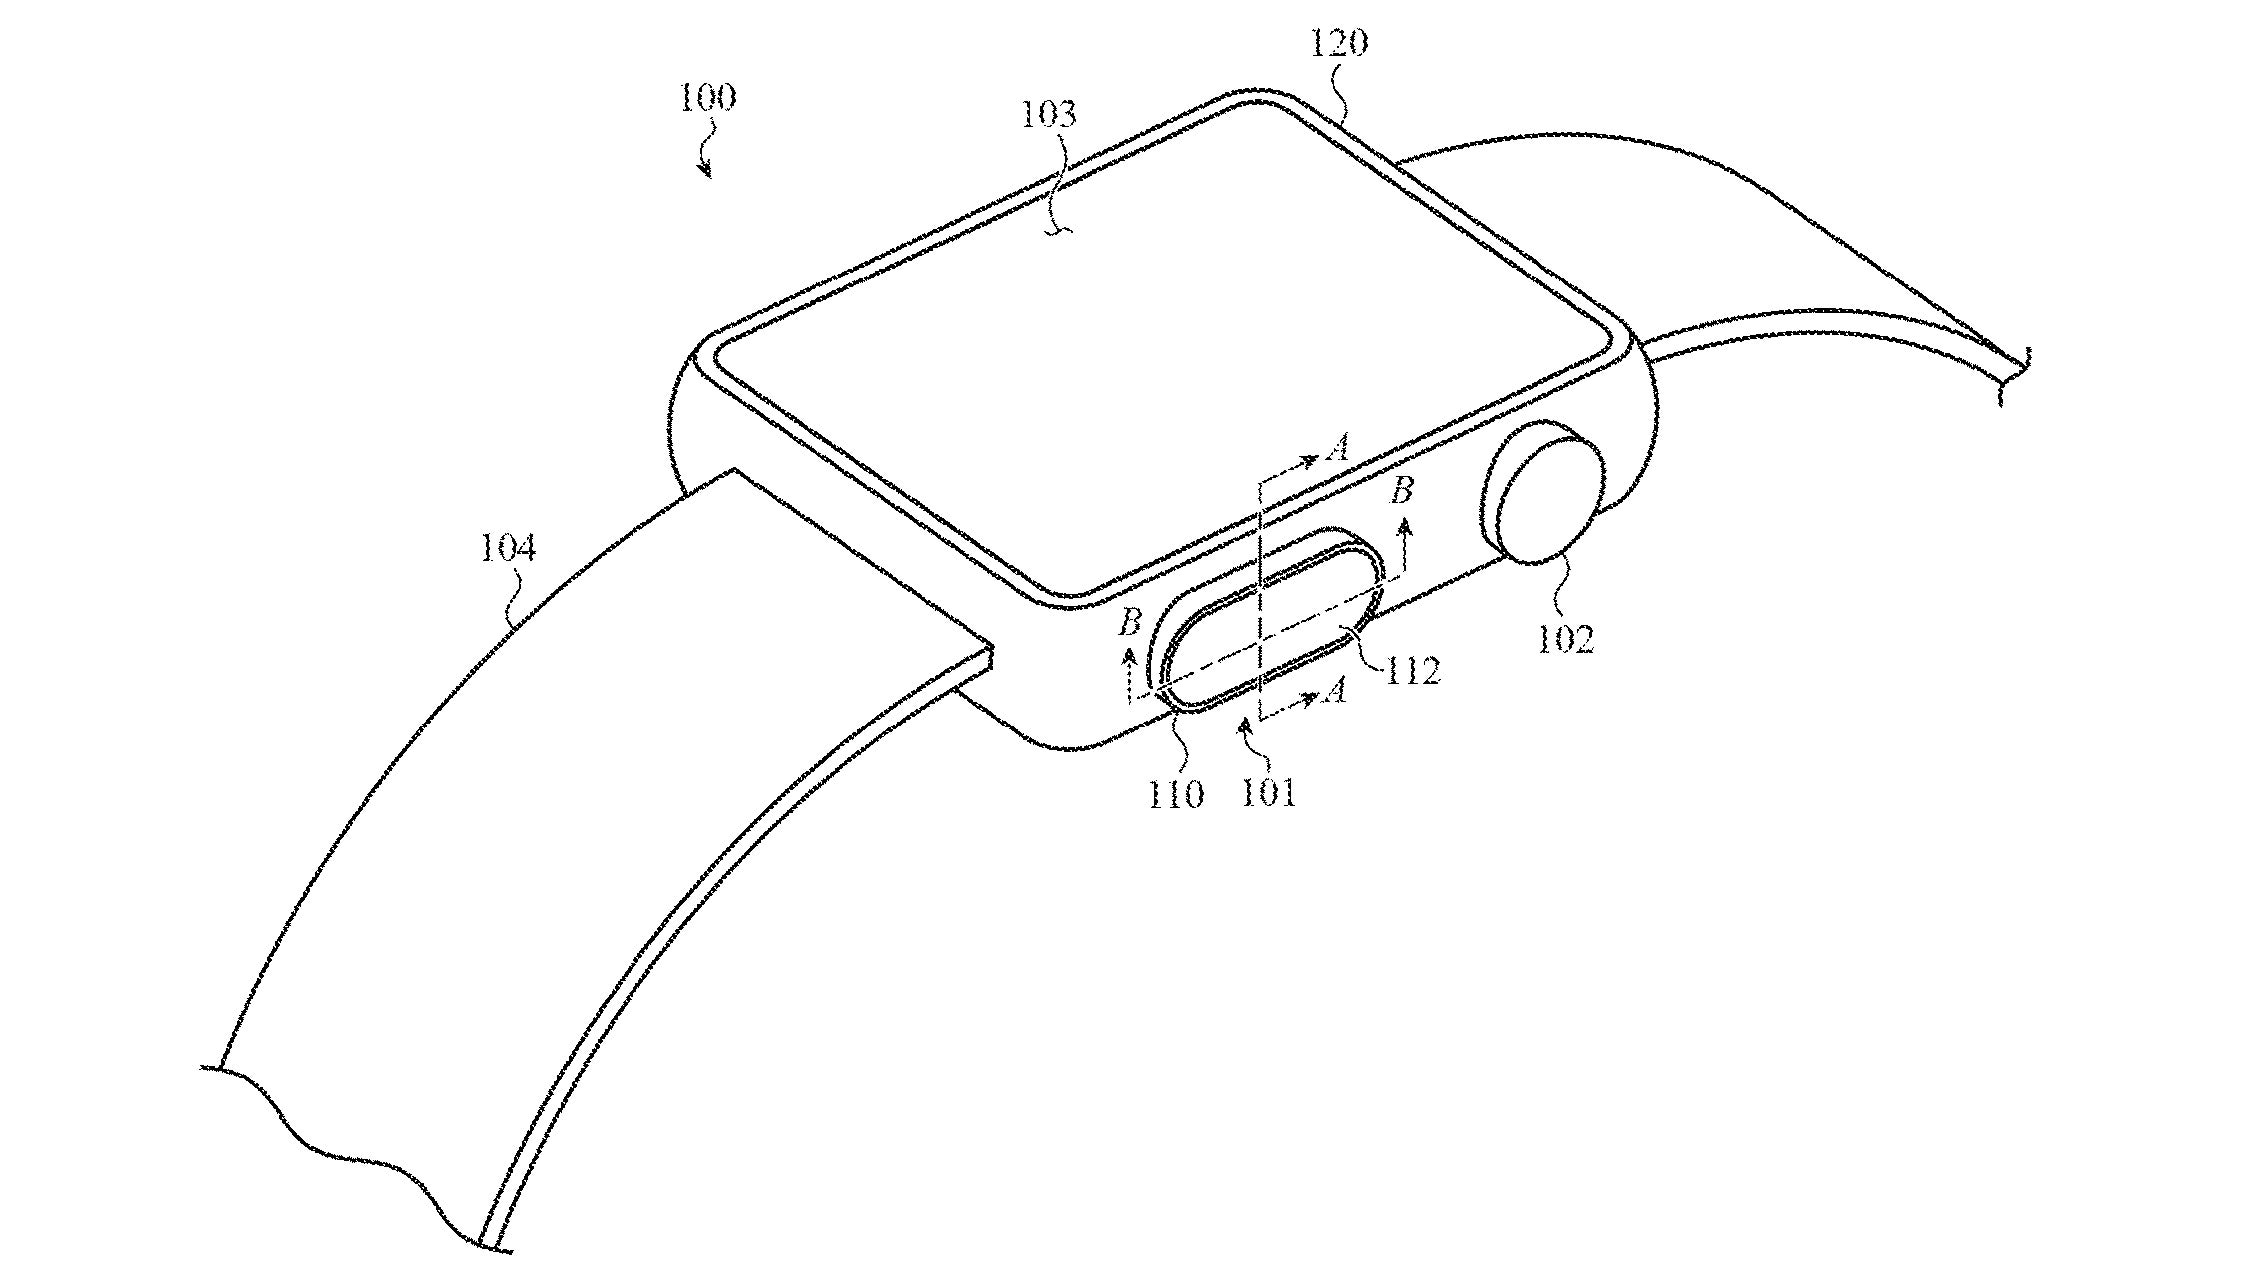 A New Patent Suggests Apple Could One Day Bring Touch ID to the Apple Watch